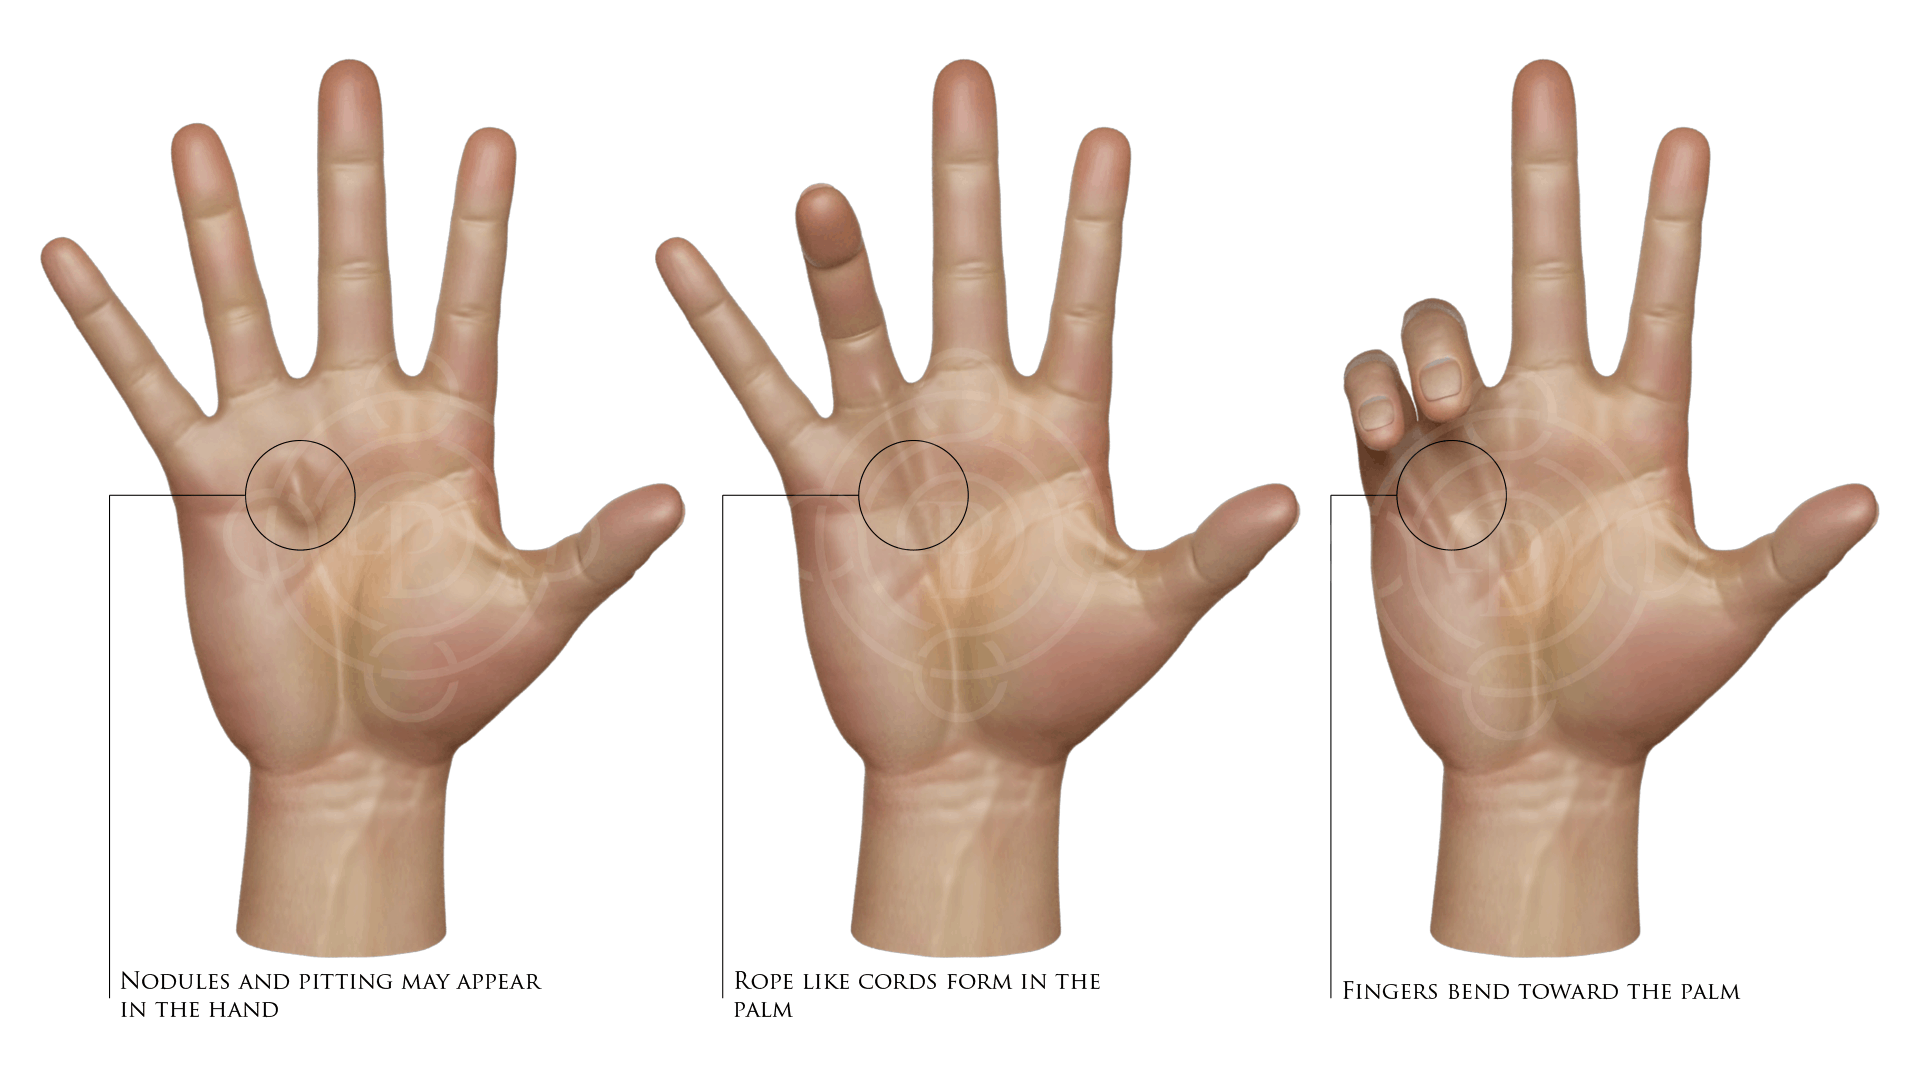 Depuytrens Disease: Nodules and Pitting May Appear in the Hand, Rope Like Cords Form in the Palm, Fingers Bend Toward the Palm